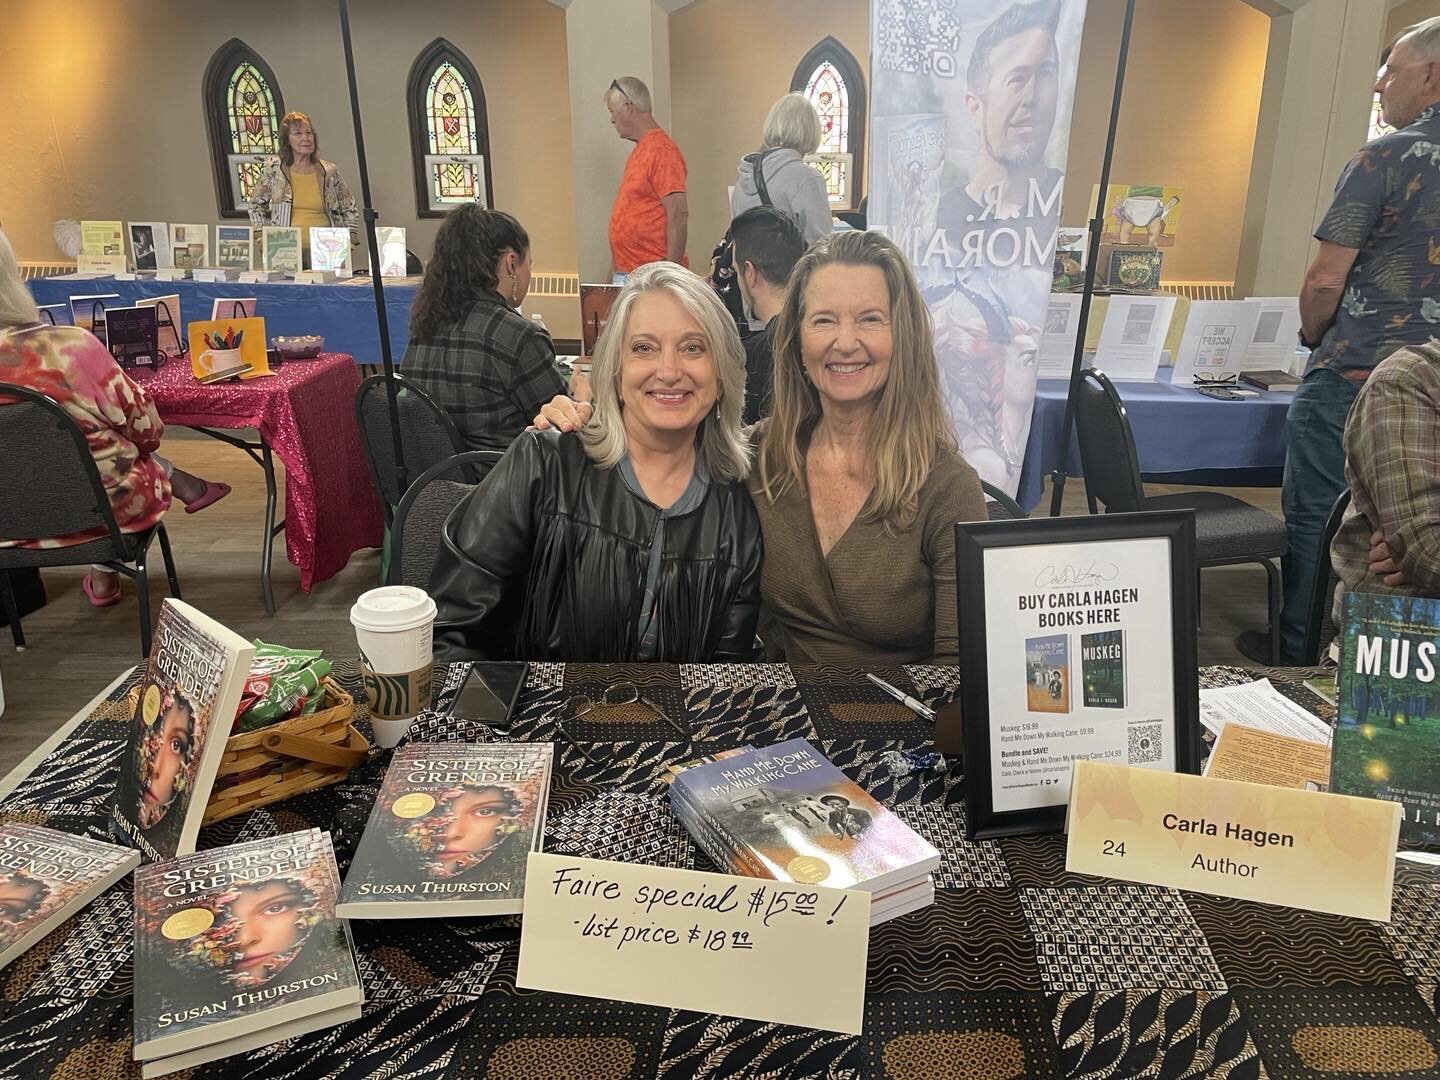 With Susan Thurston at the Calumet author tables, Rosemount Country Fair. Selling books, talking books, having fun!